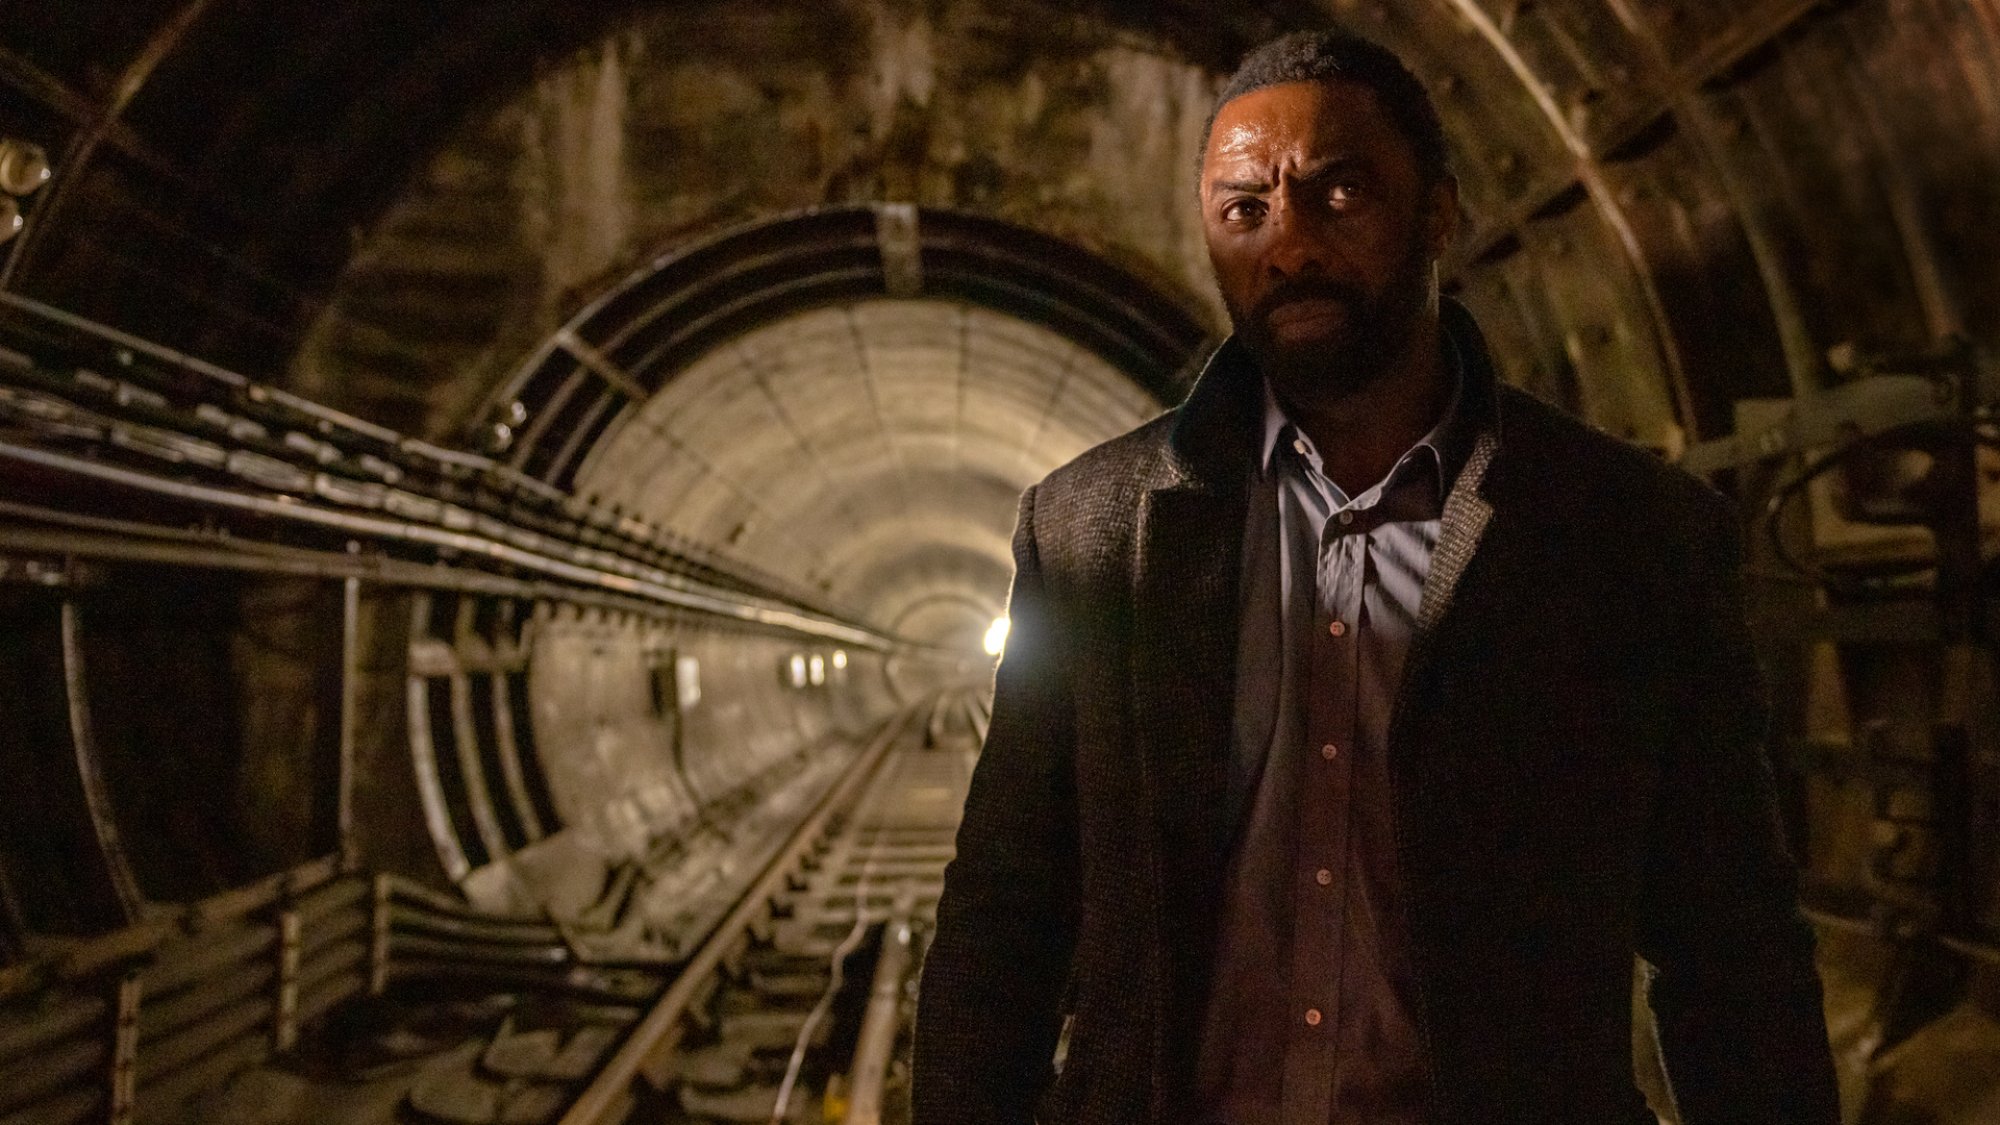 Idris Elba stands in an underground train tunnel in the film "Luther: The Fallen Sun"